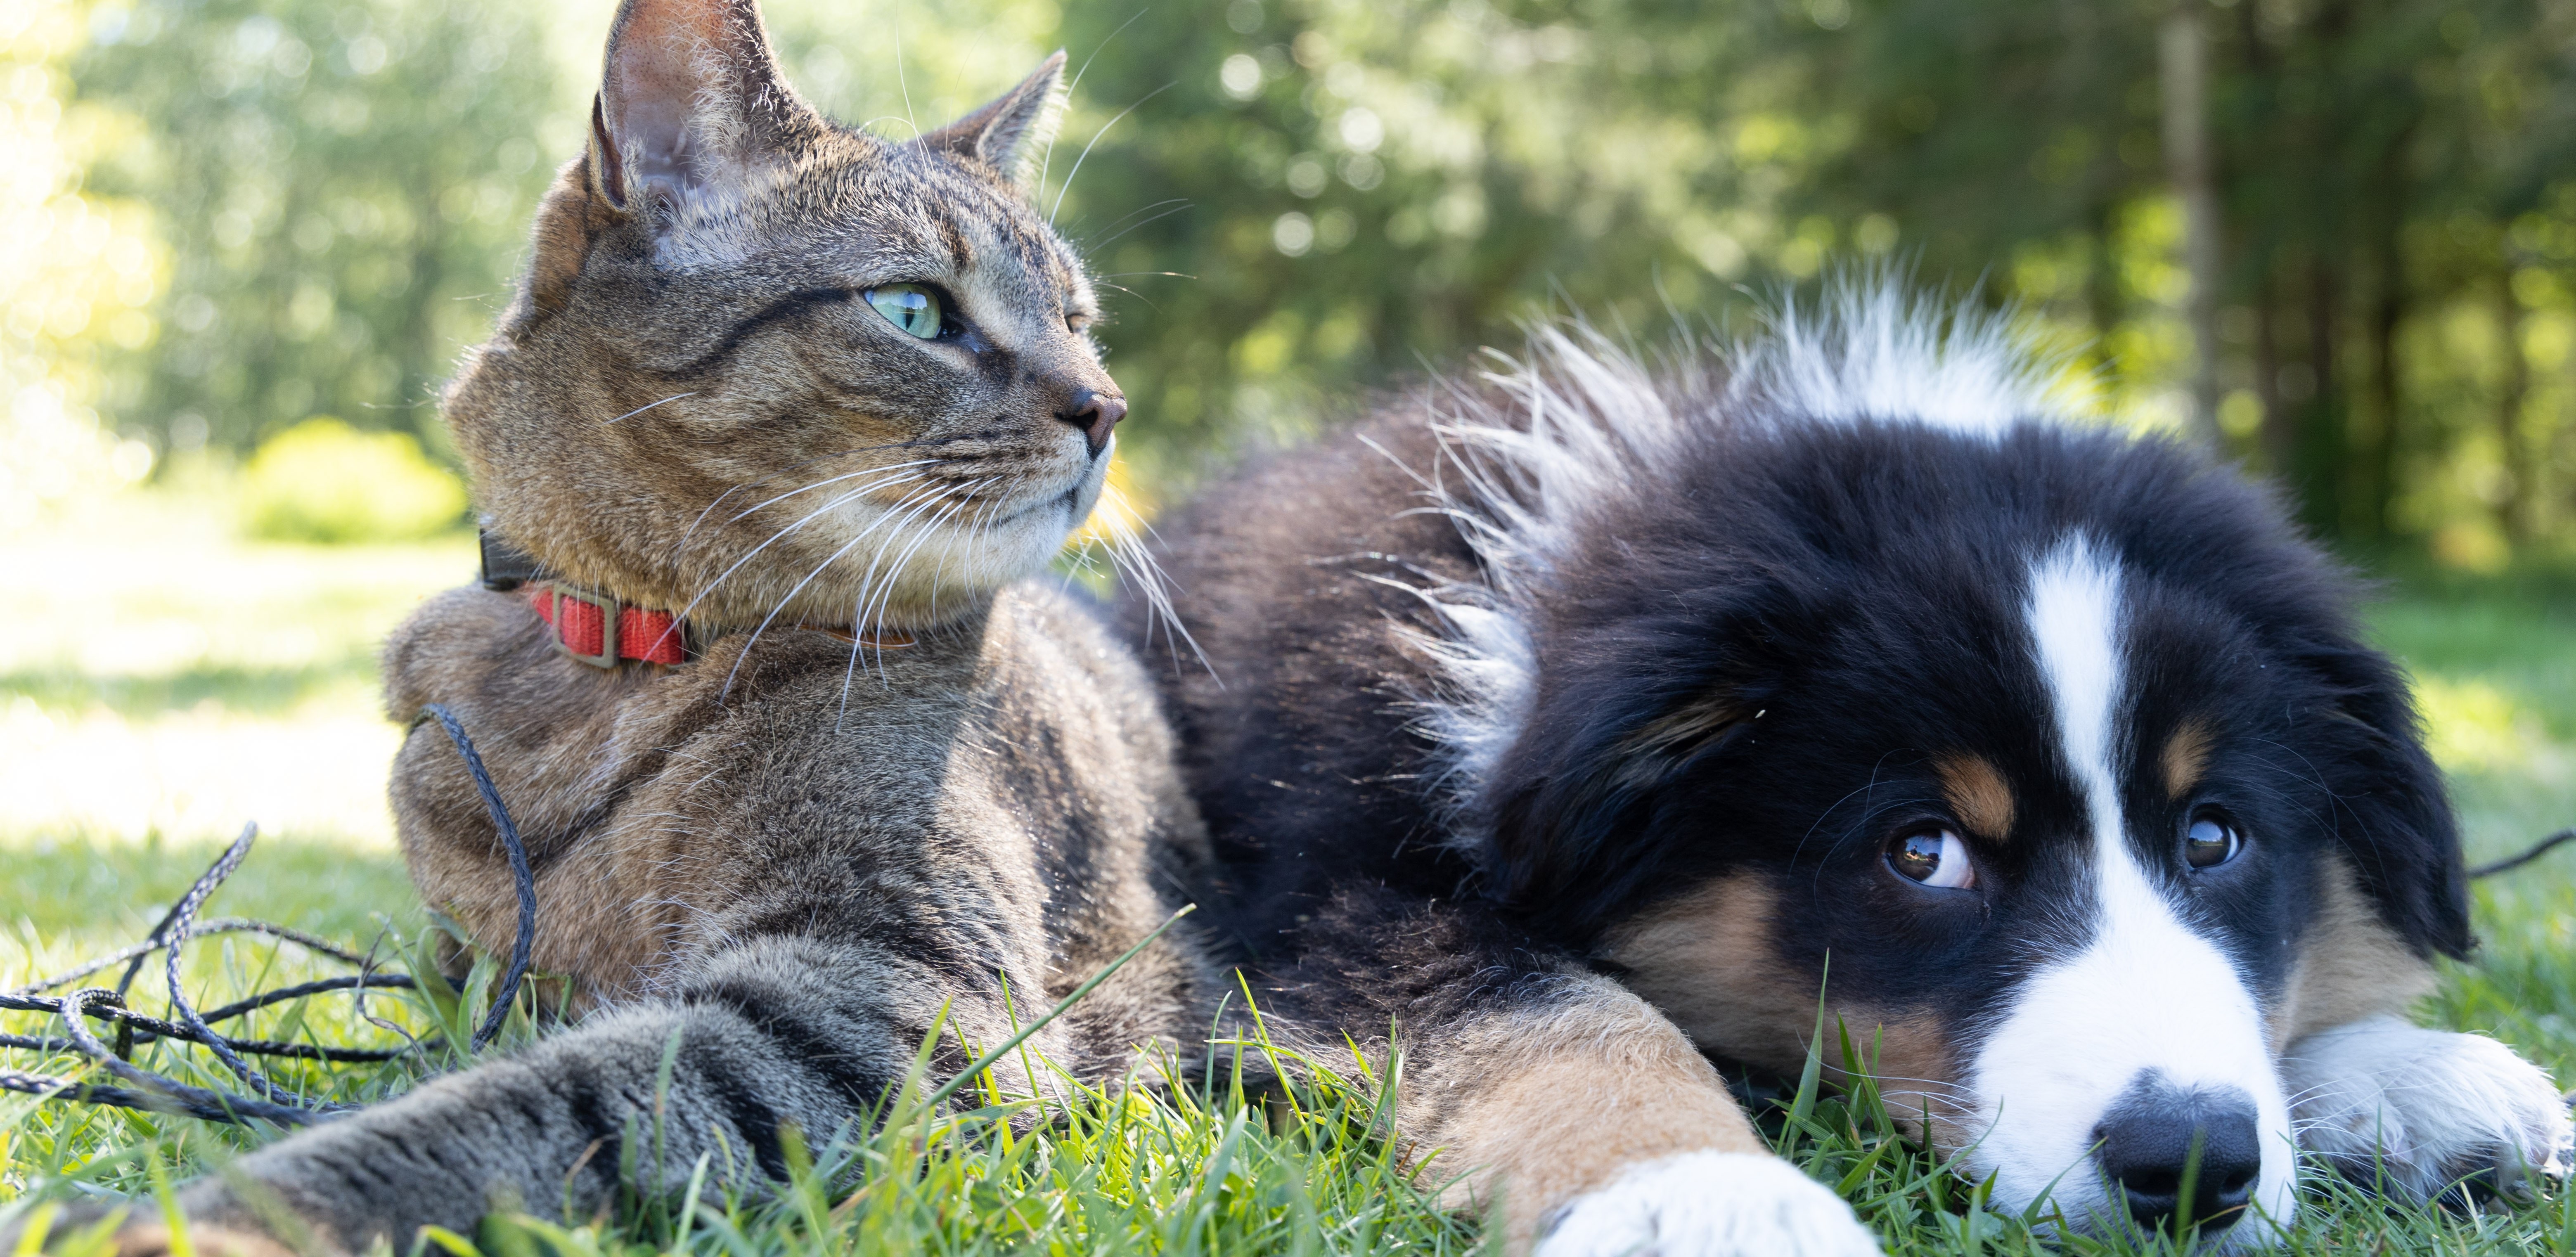 A dog and a cat sit close by on the grass.